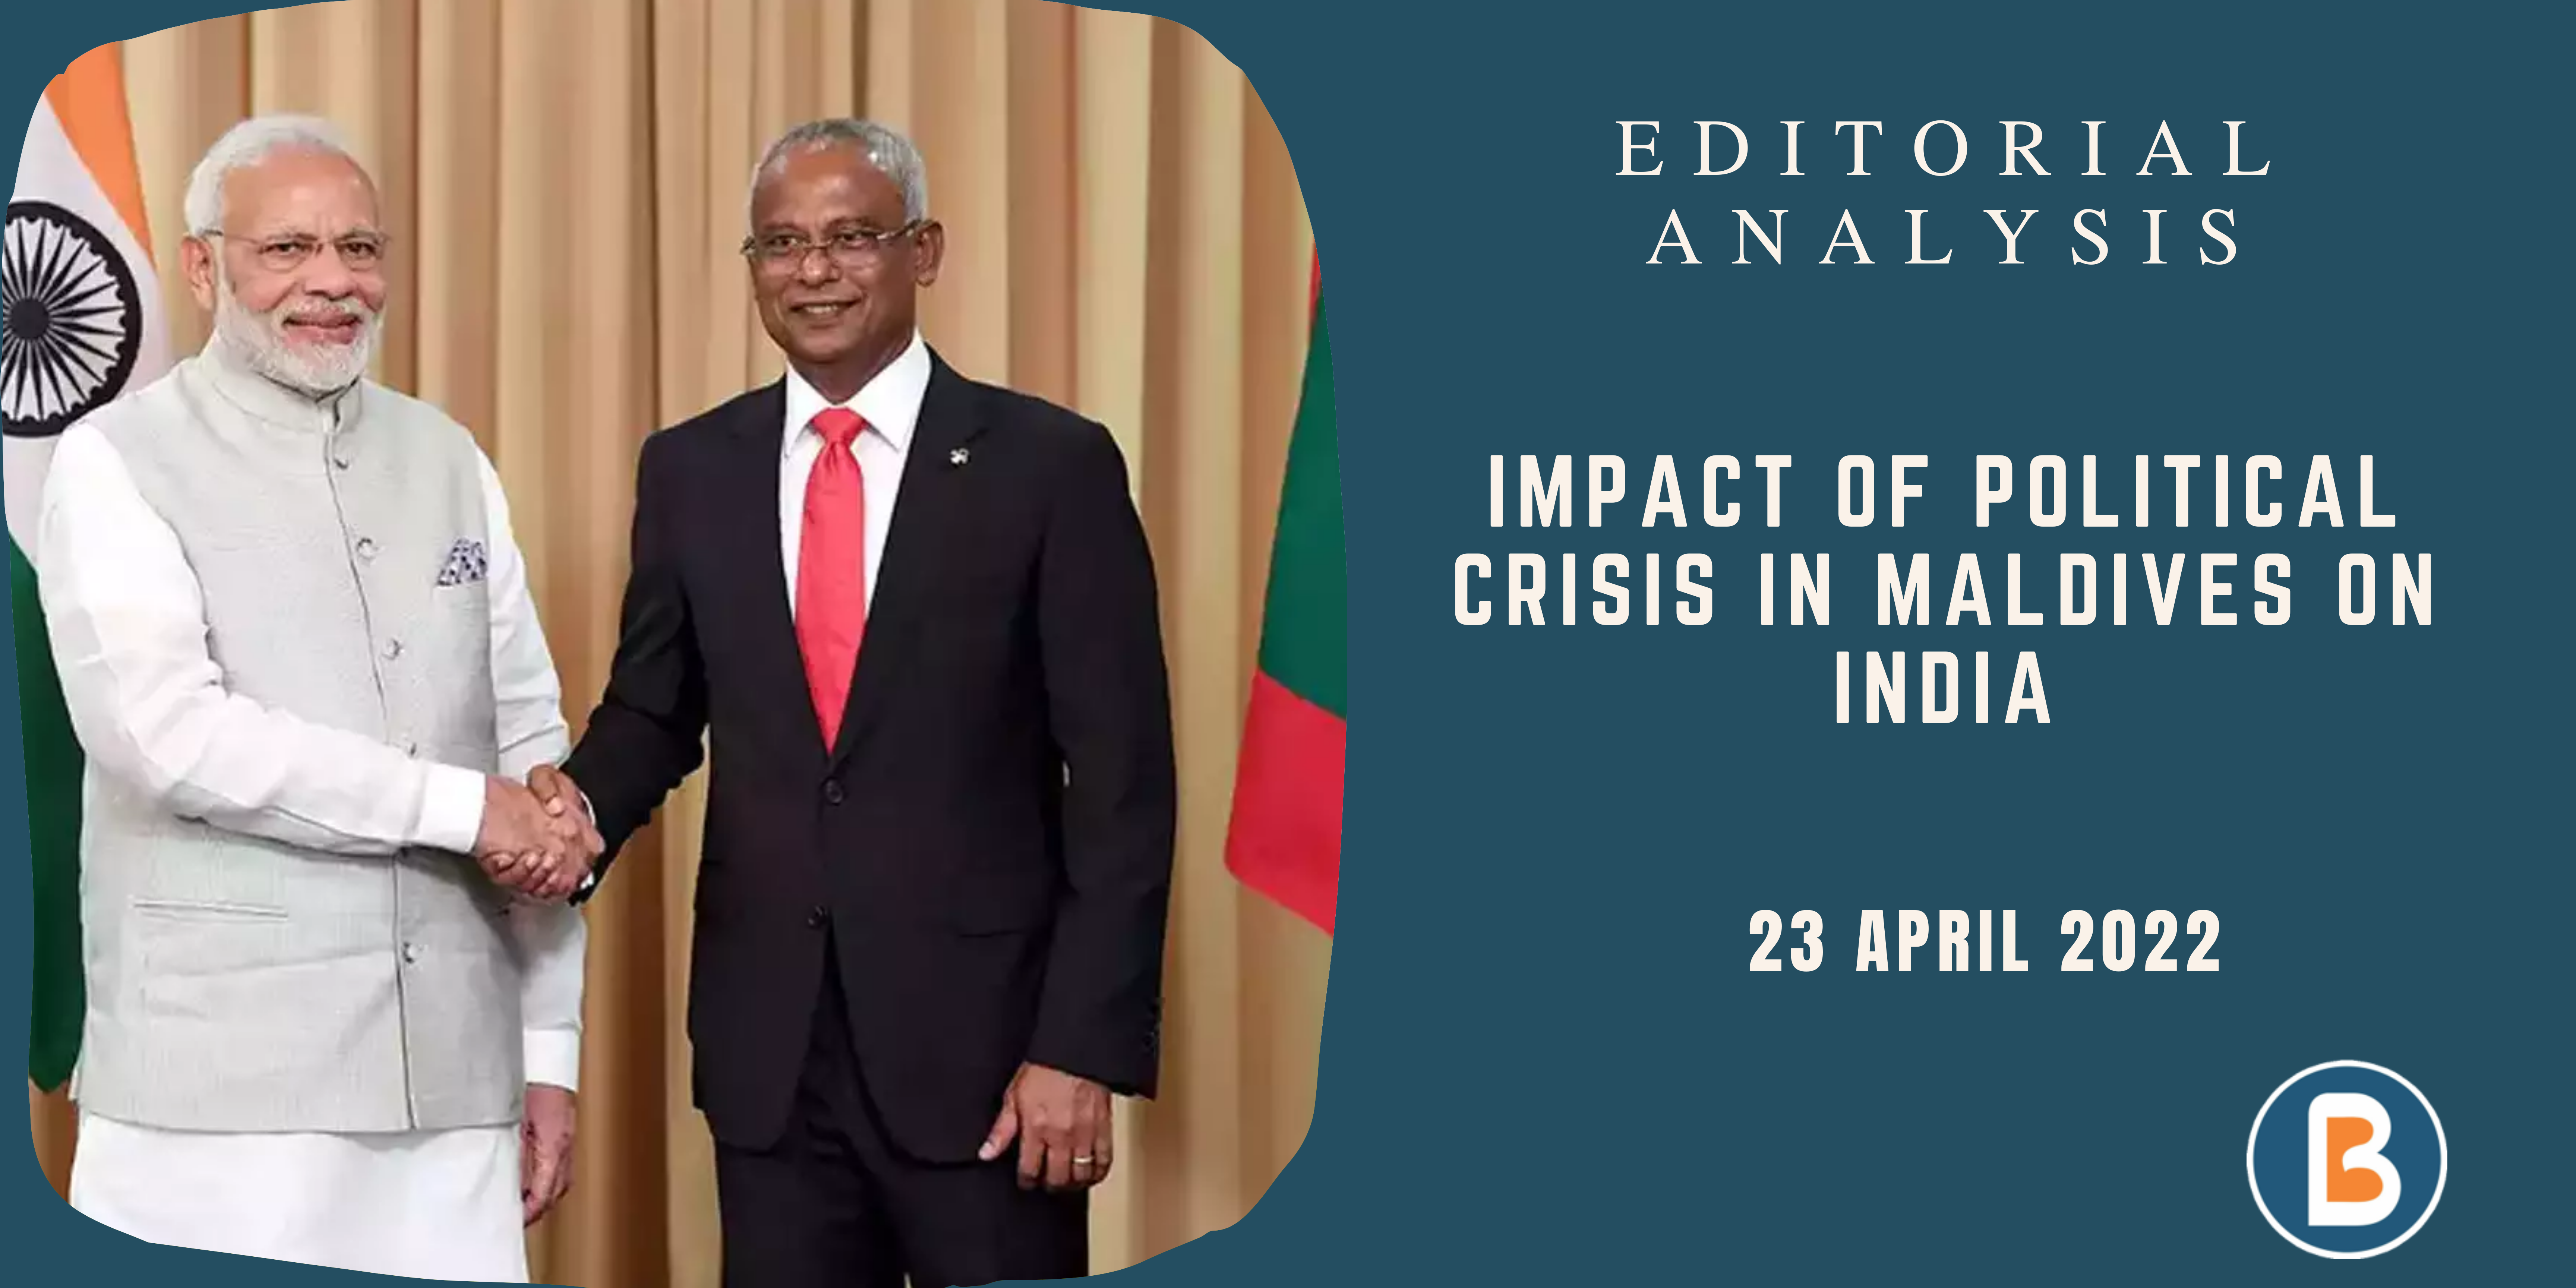 Editorial Analysis for IAS - Impact of Political Crisis in Maldives on India